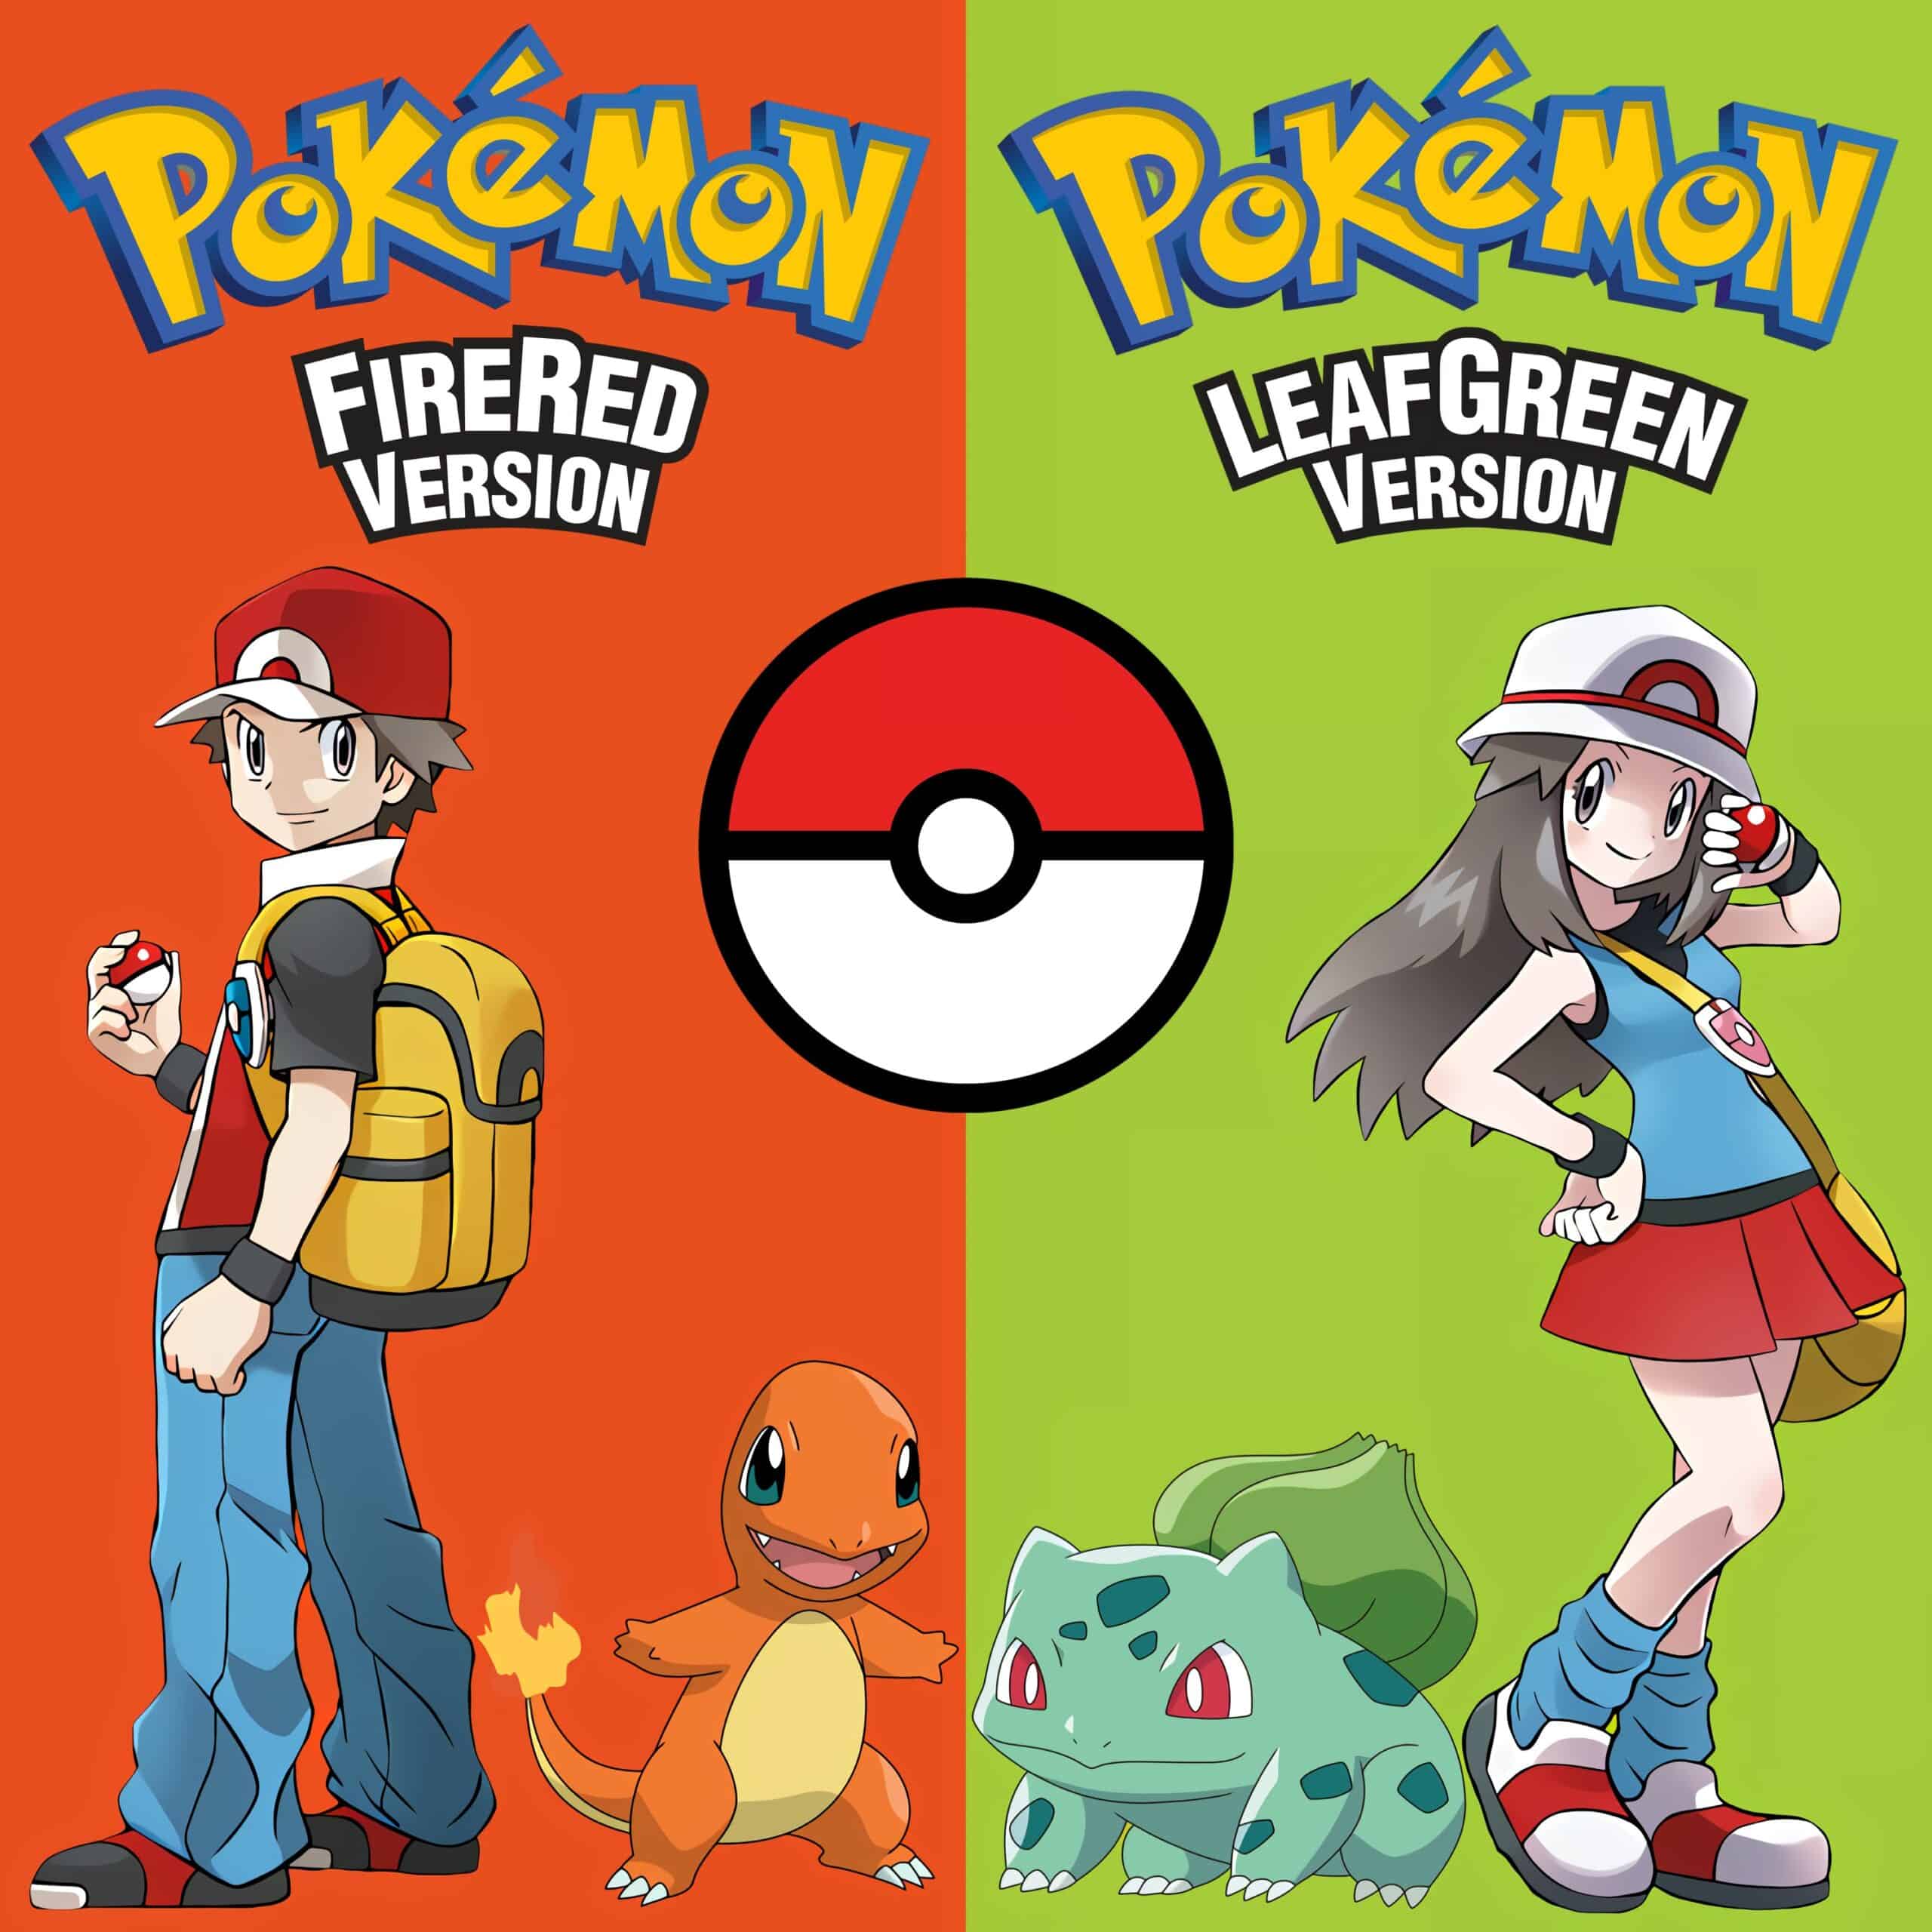 Is there only one Eevee in fire red?